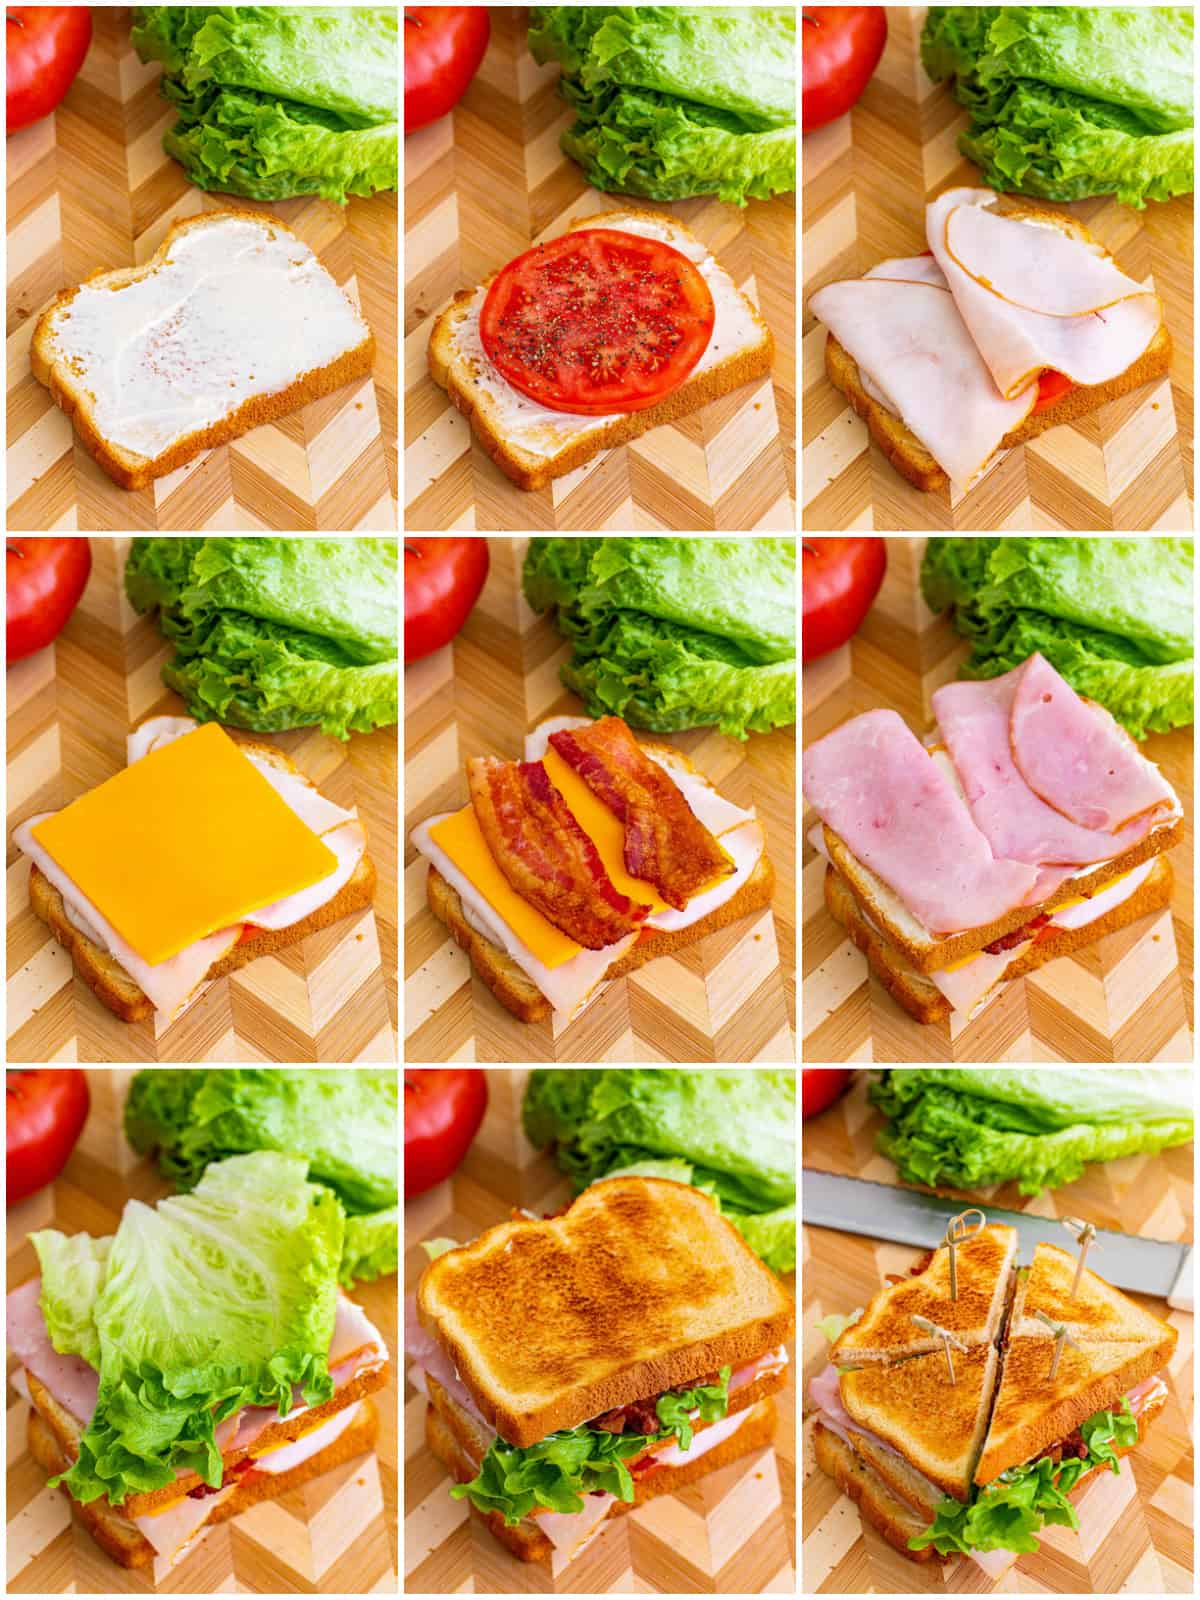 Step by step photos on how to make a Club Sandwich Recipe